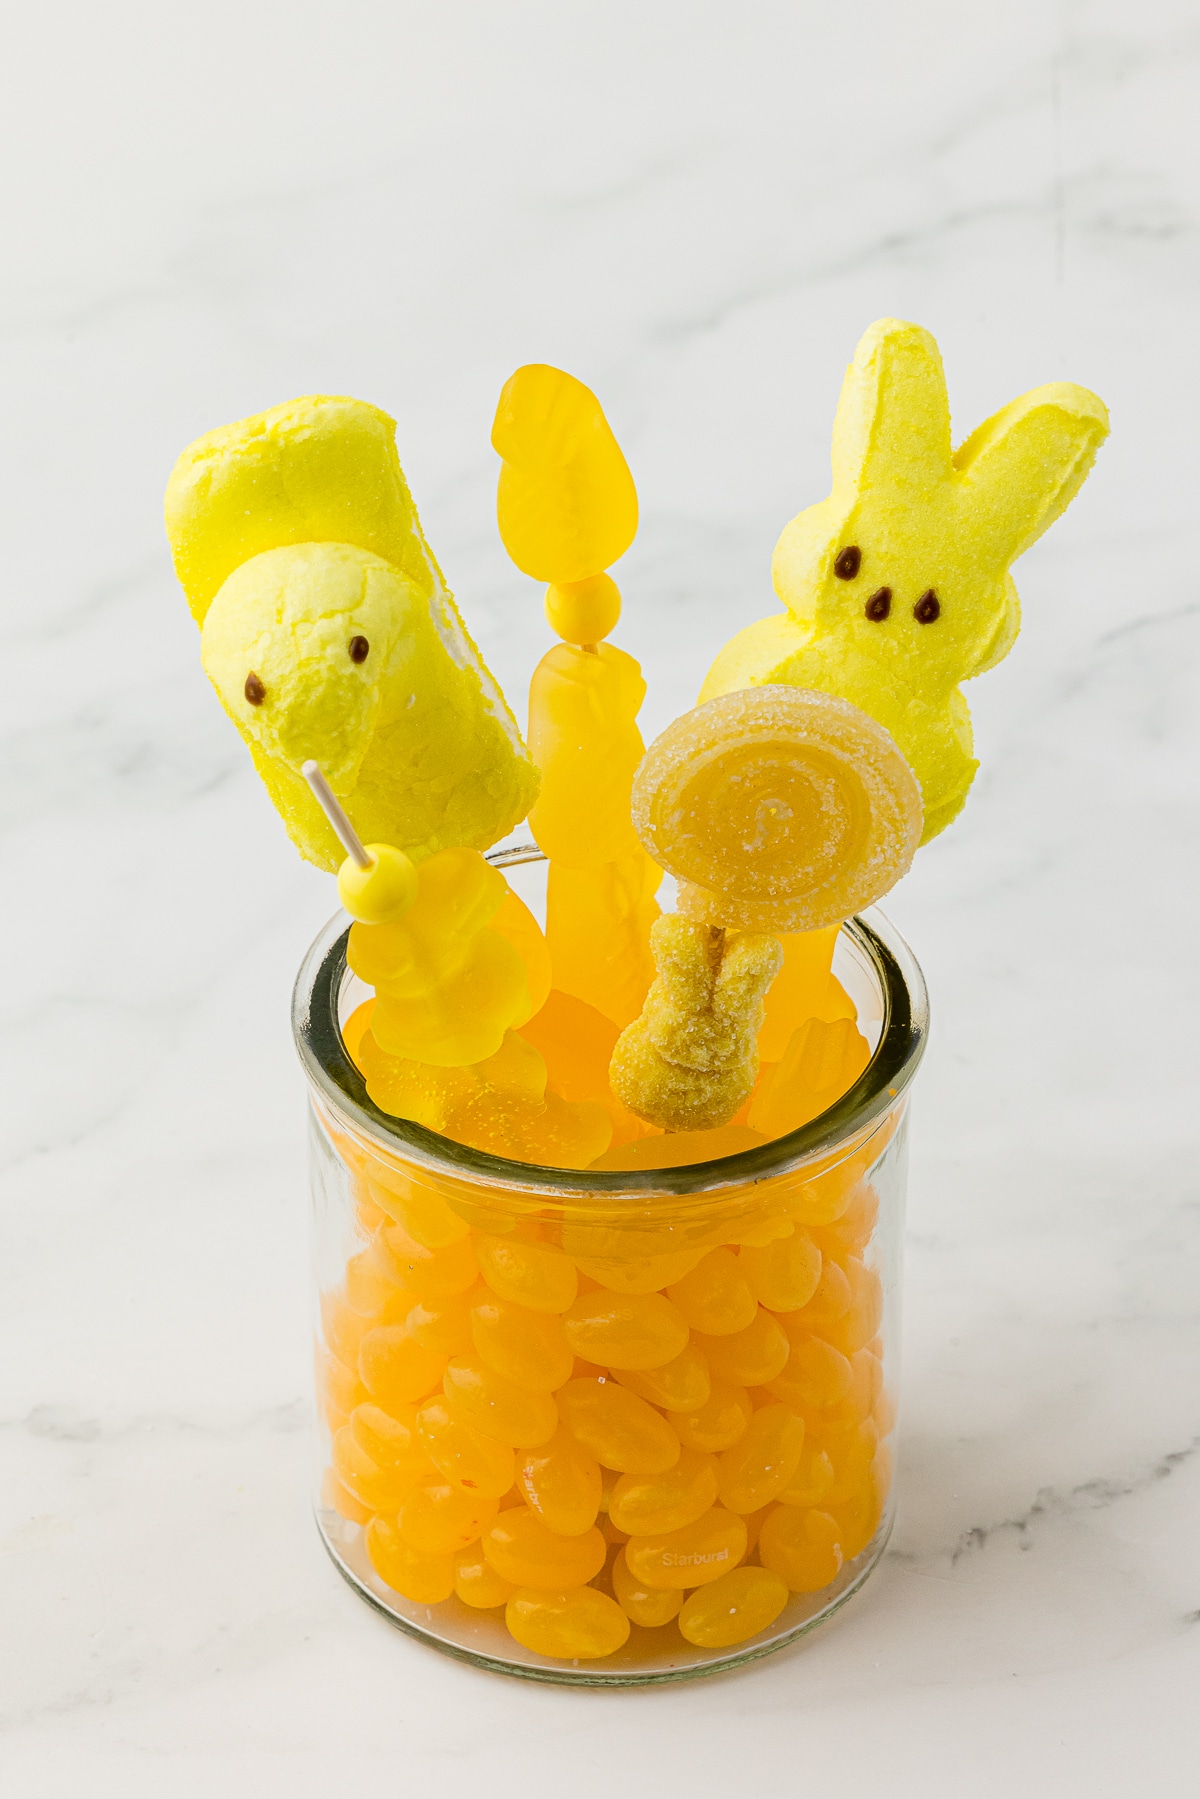 Yellow jelly beans in a small jar with yellow candy kabobs made with yellow gummy candy bought at Five Below on a white countertop.